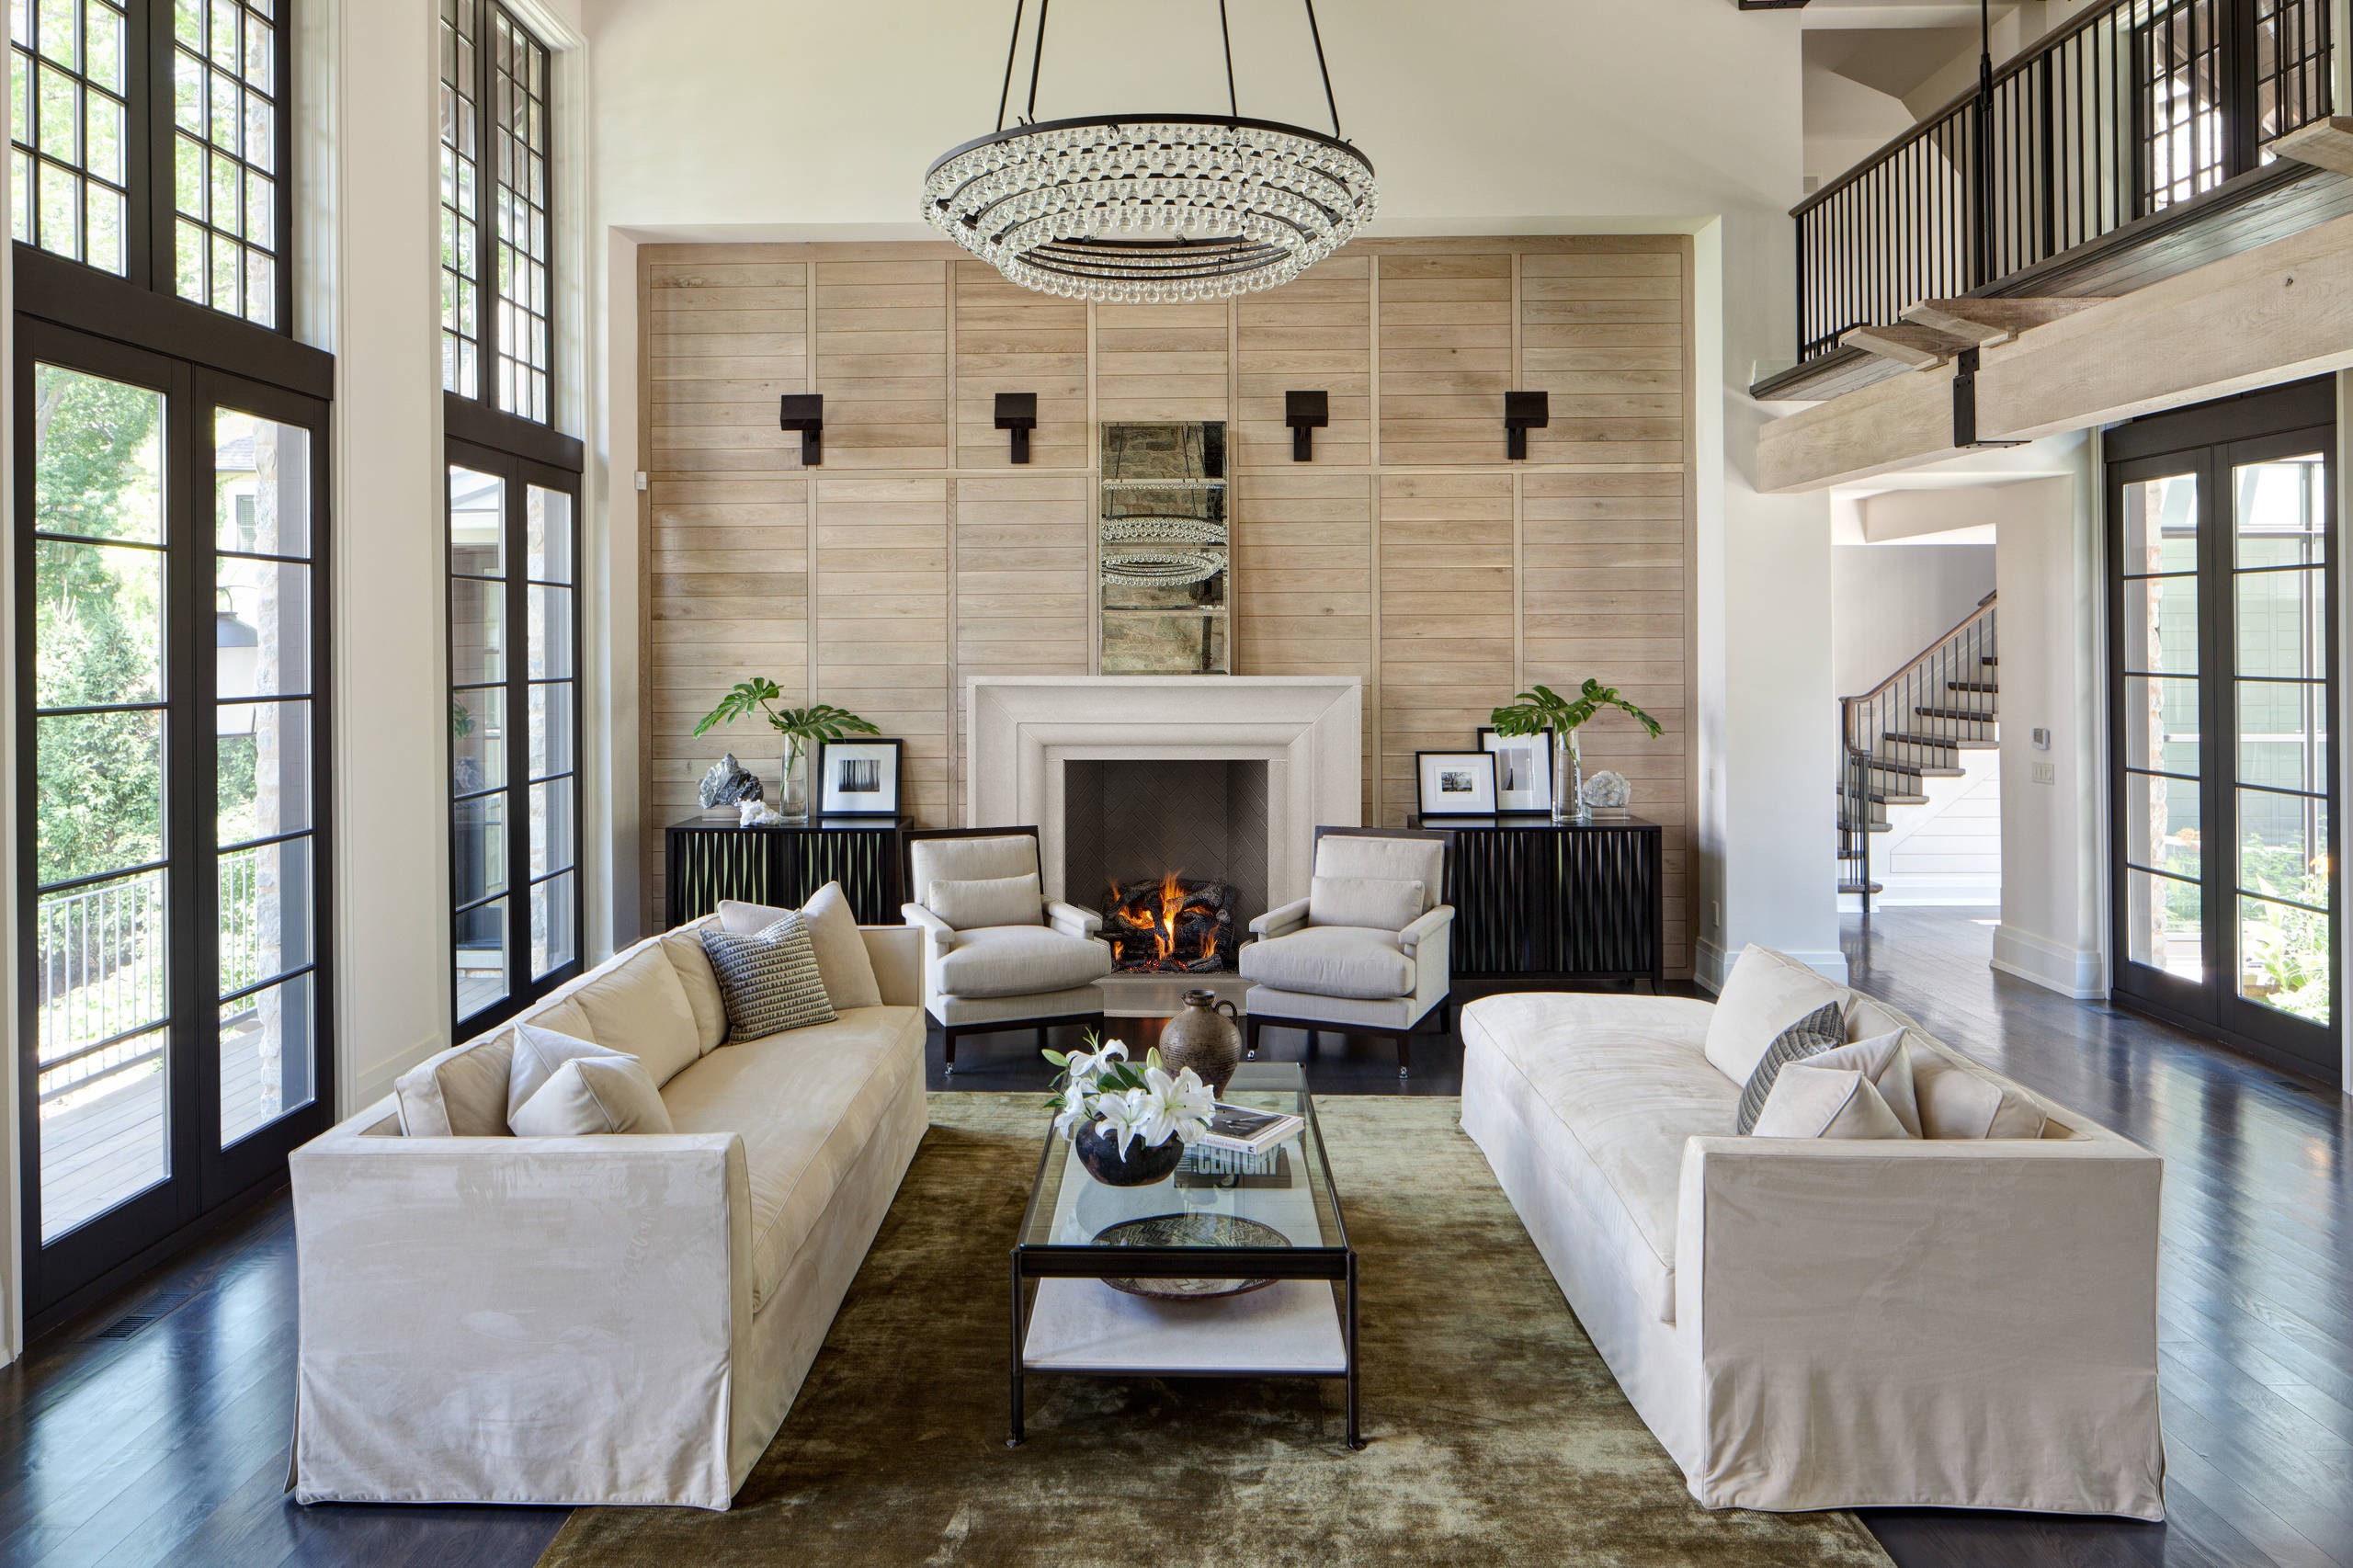 A spacious living room with a fireplace mantel and chandelier.